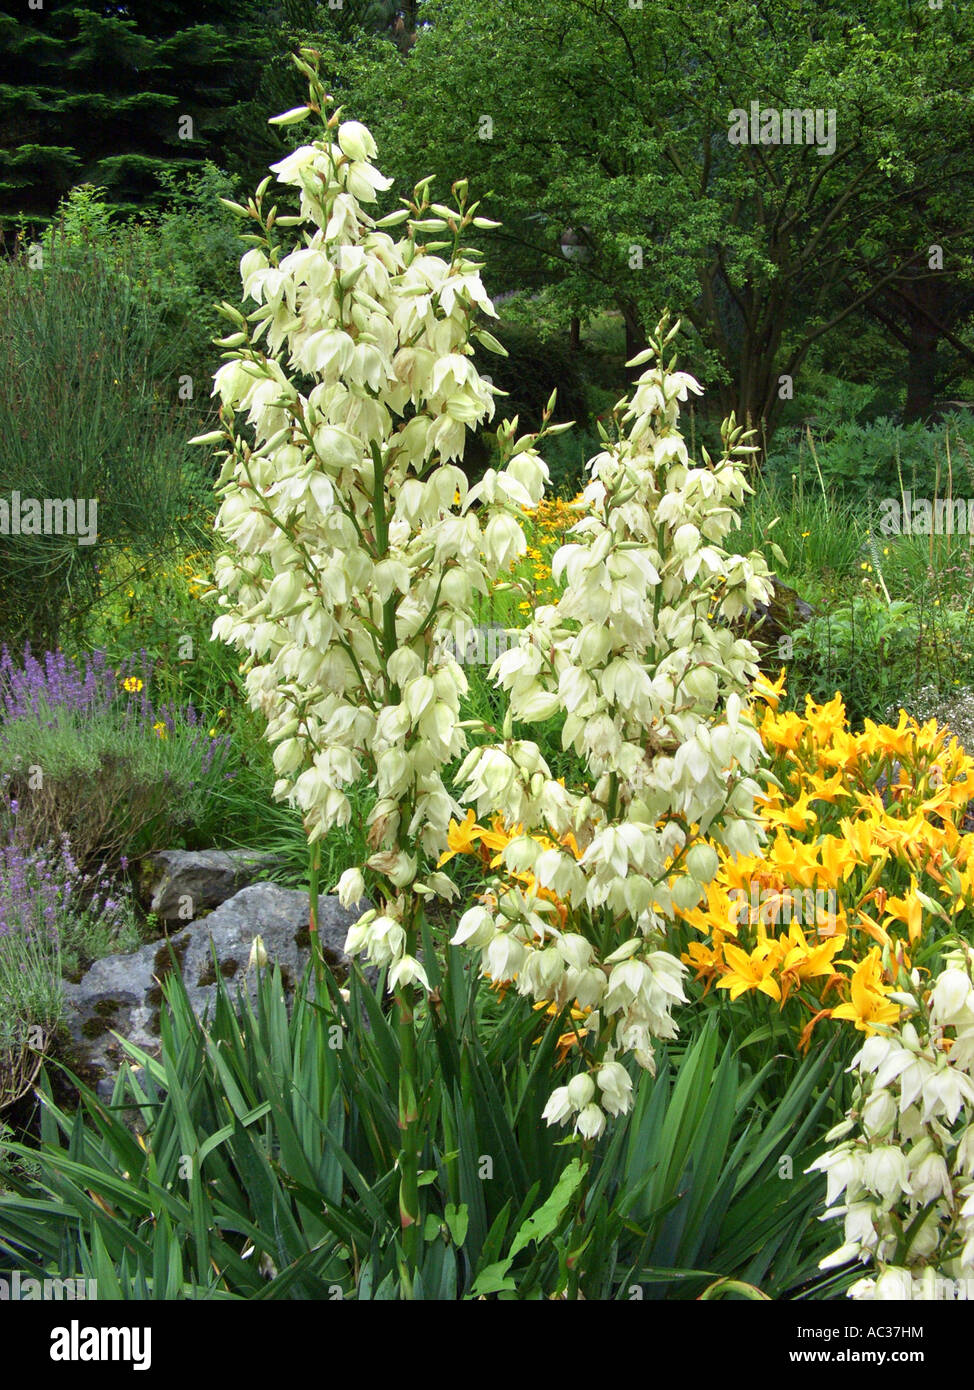 Adam's needle, weak-leaf Yucca (Yucca filamentosa), blooming in a flower bed Stock Photo